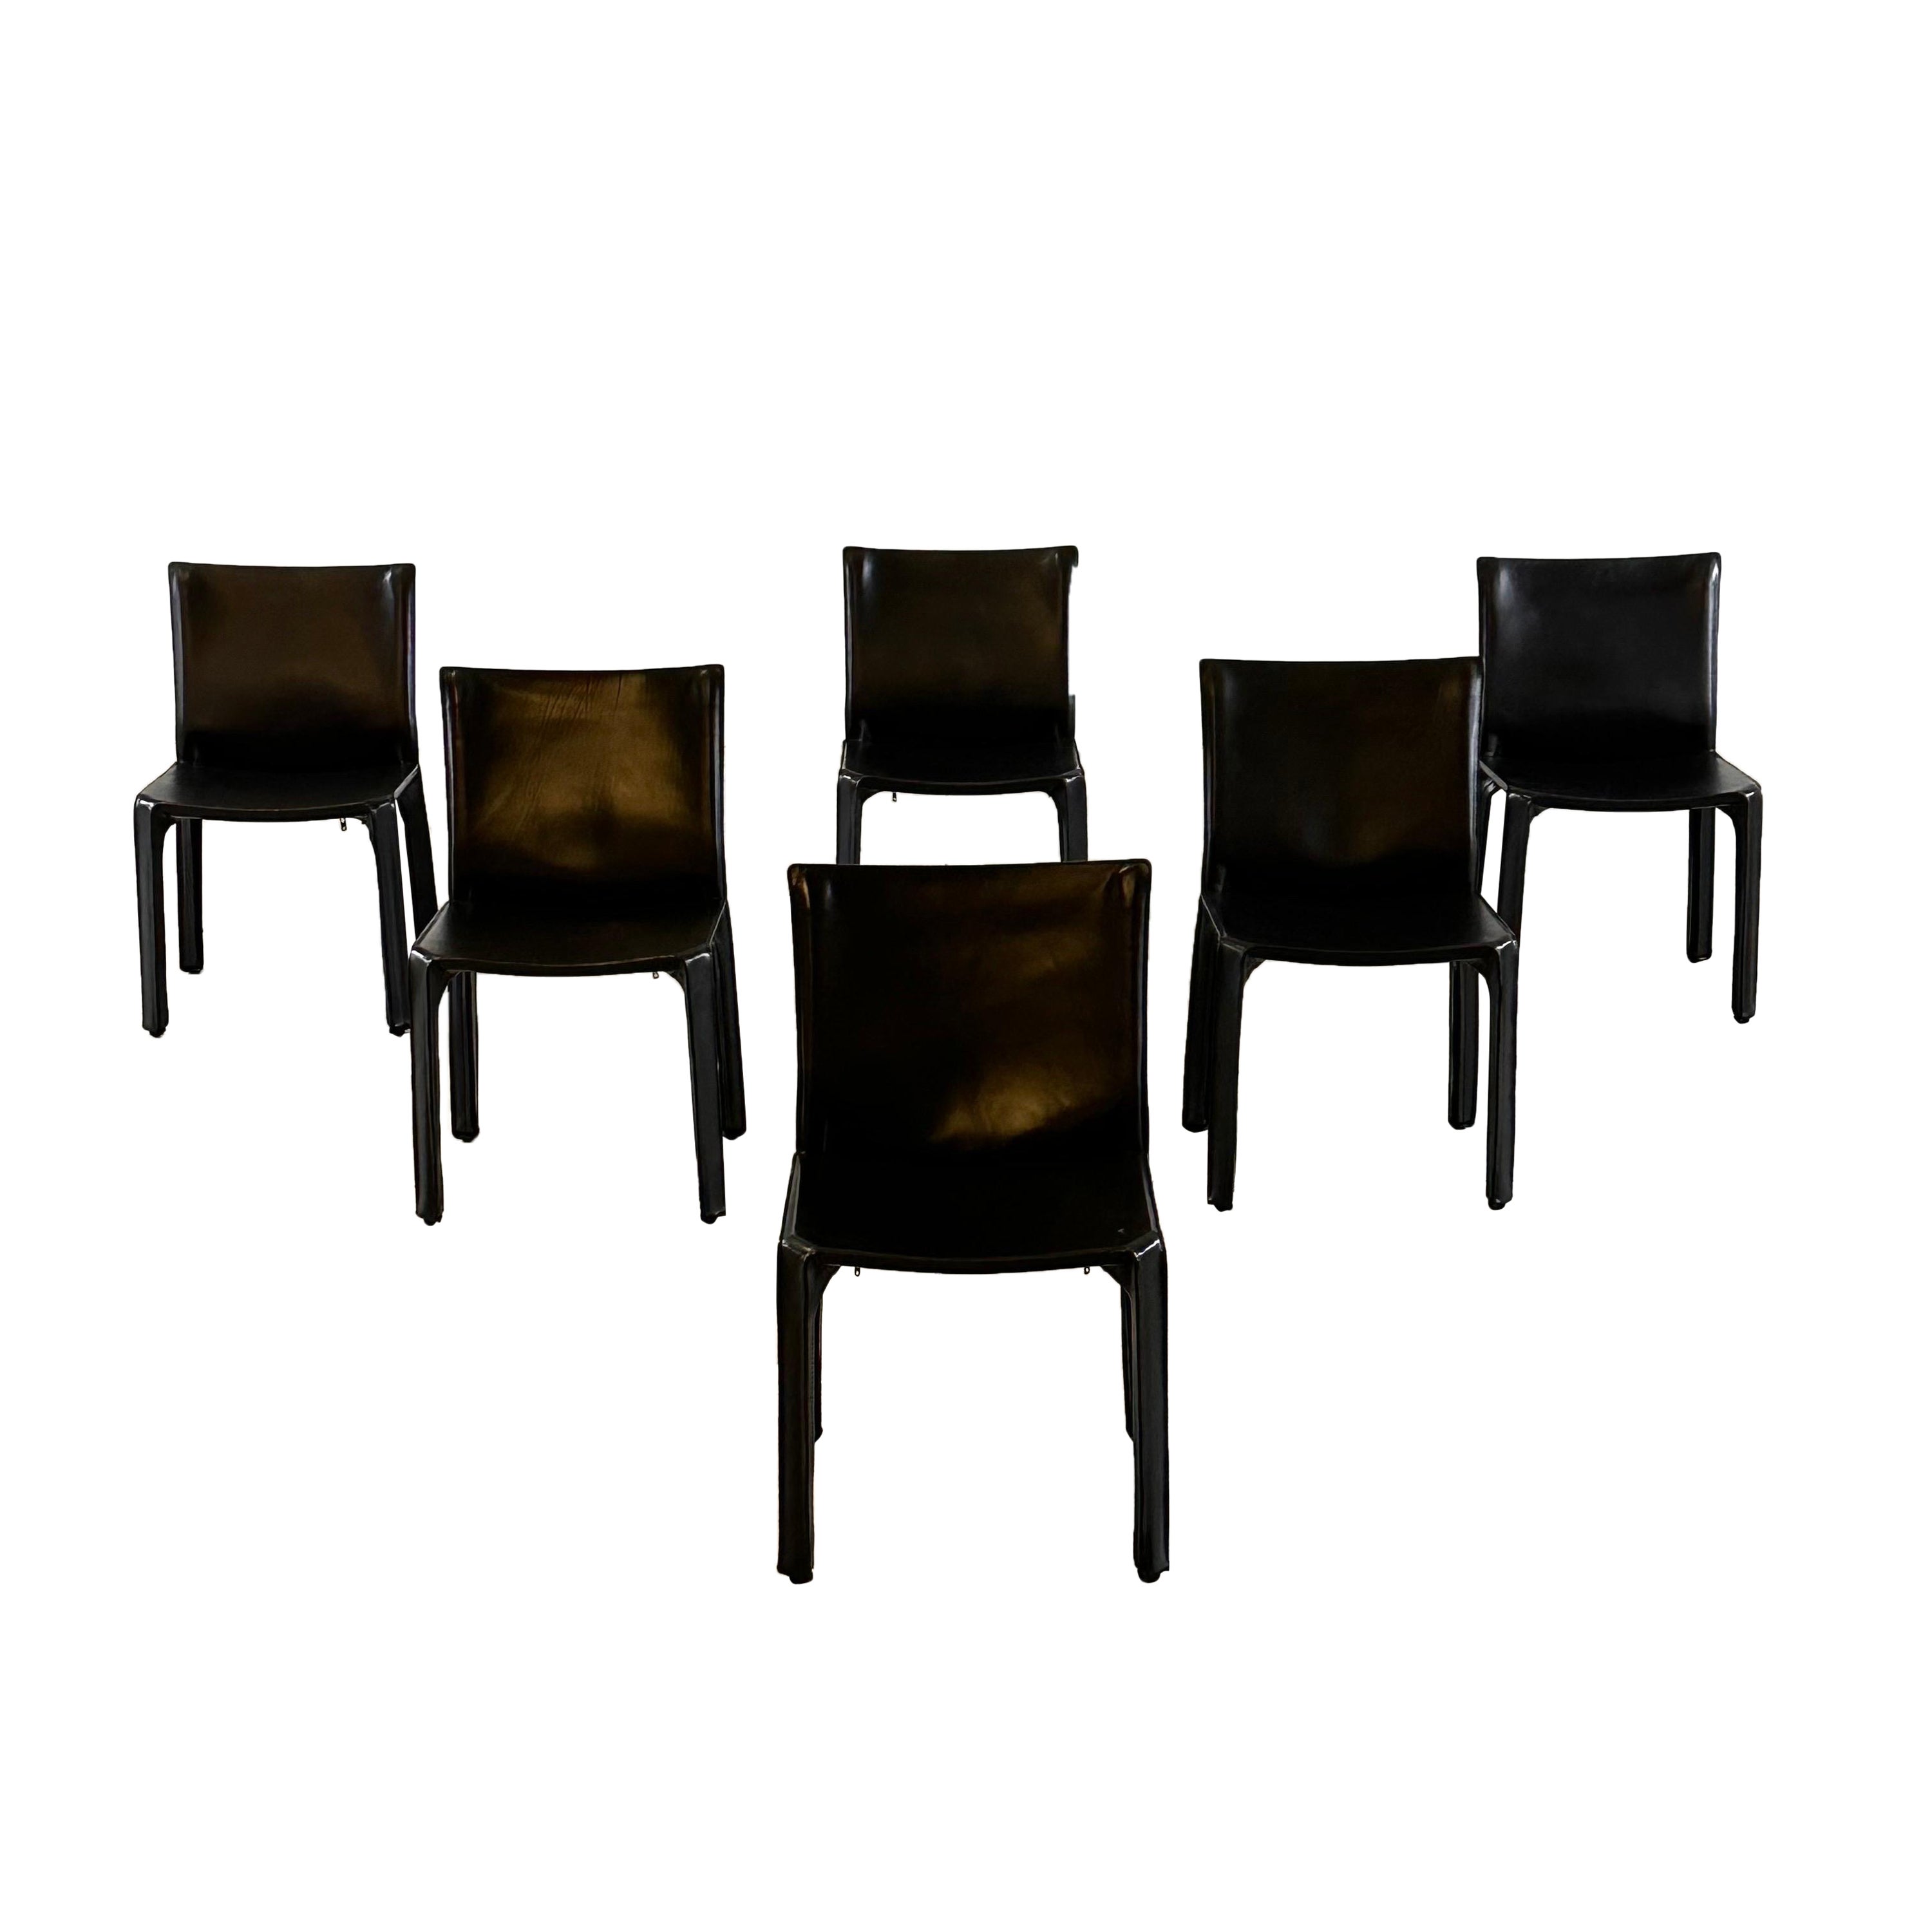 Set of Six CAB 412 Chairs by Mario Bellini for Cassina in Black Leather, 1970s For Sale